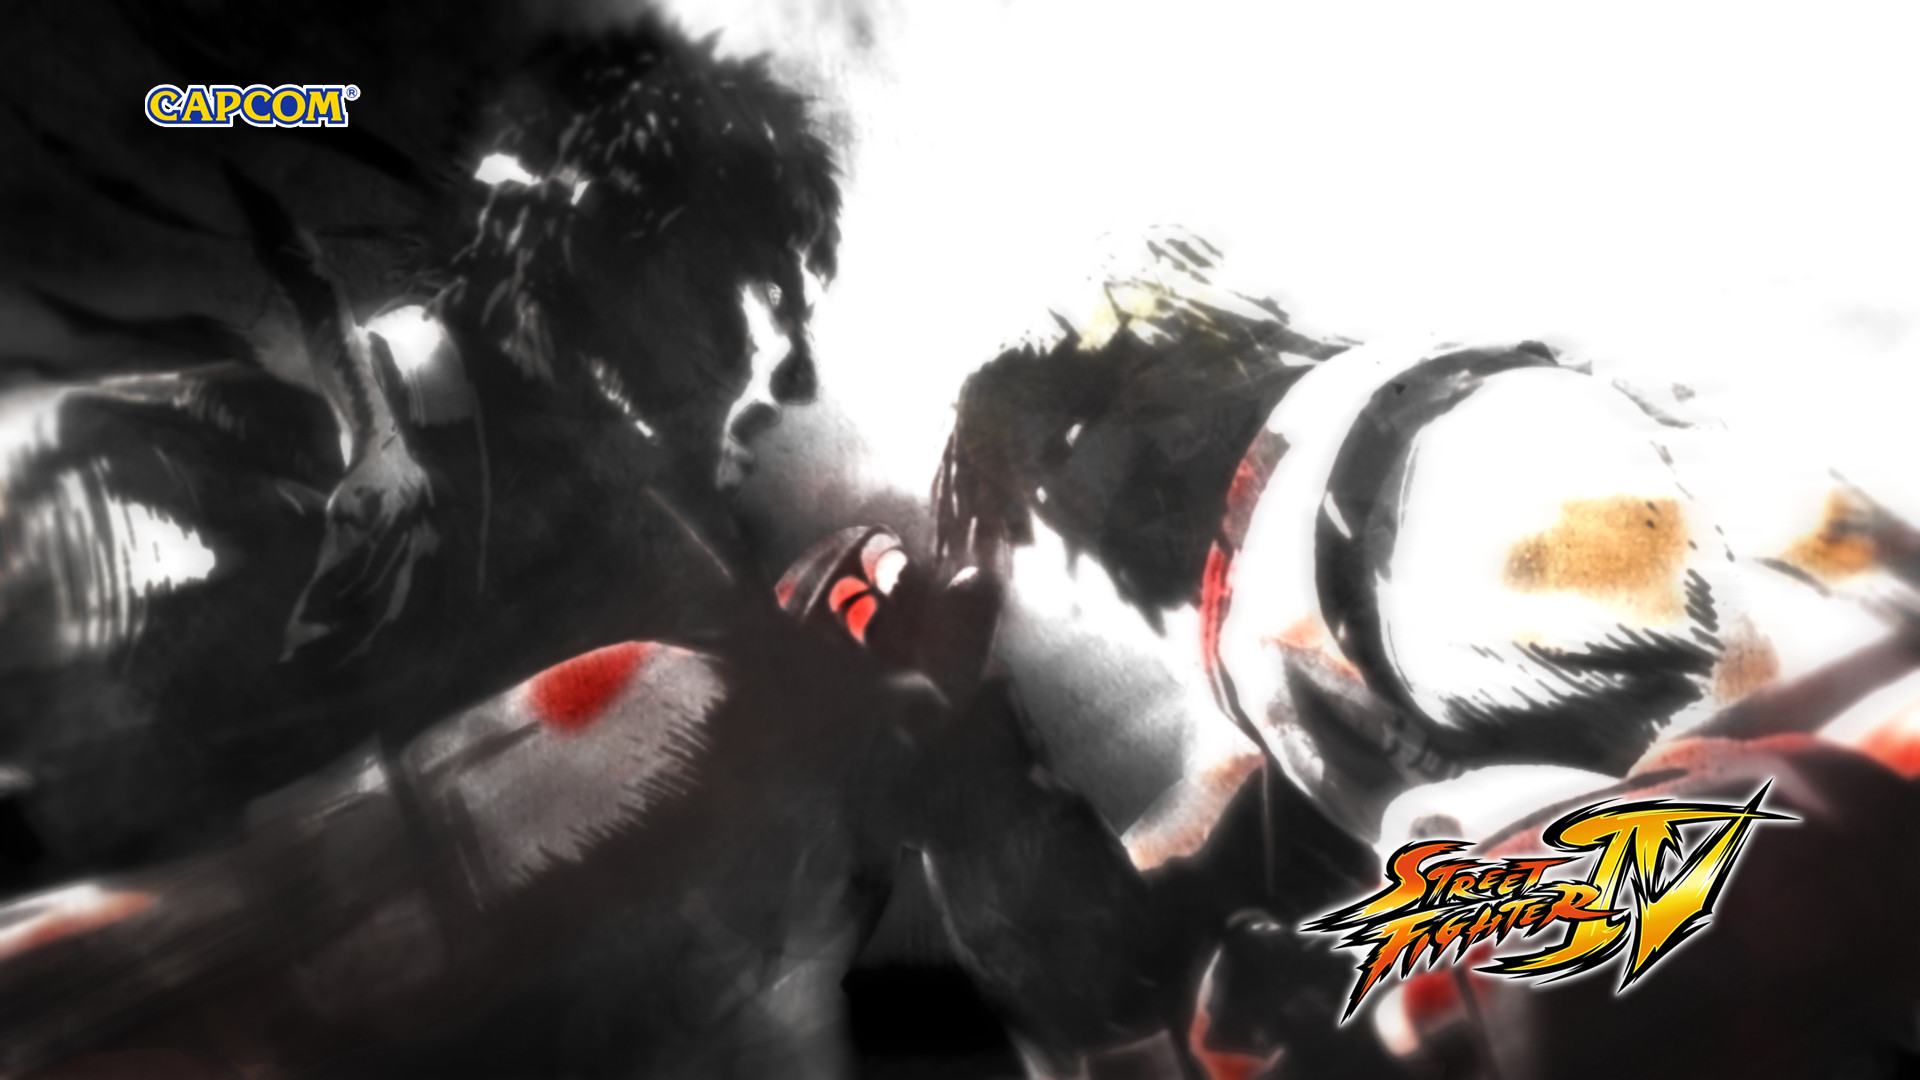 1920x1080 Street Fighter images Super Street Fighter 4 3d Edition HD wallpaper and  background photos